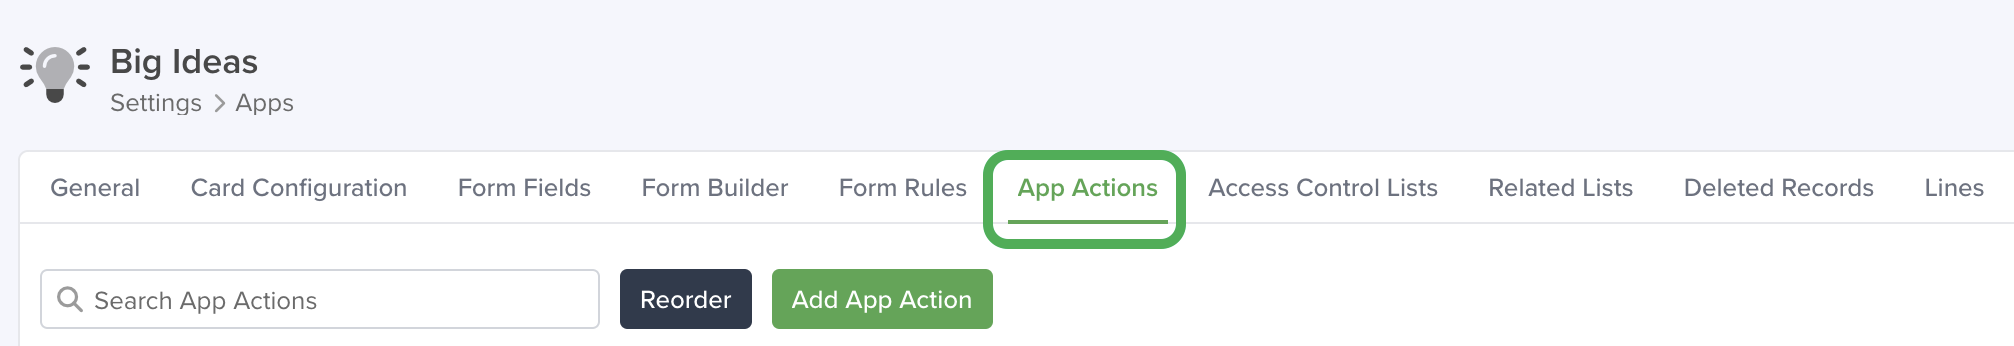 app_actions.png